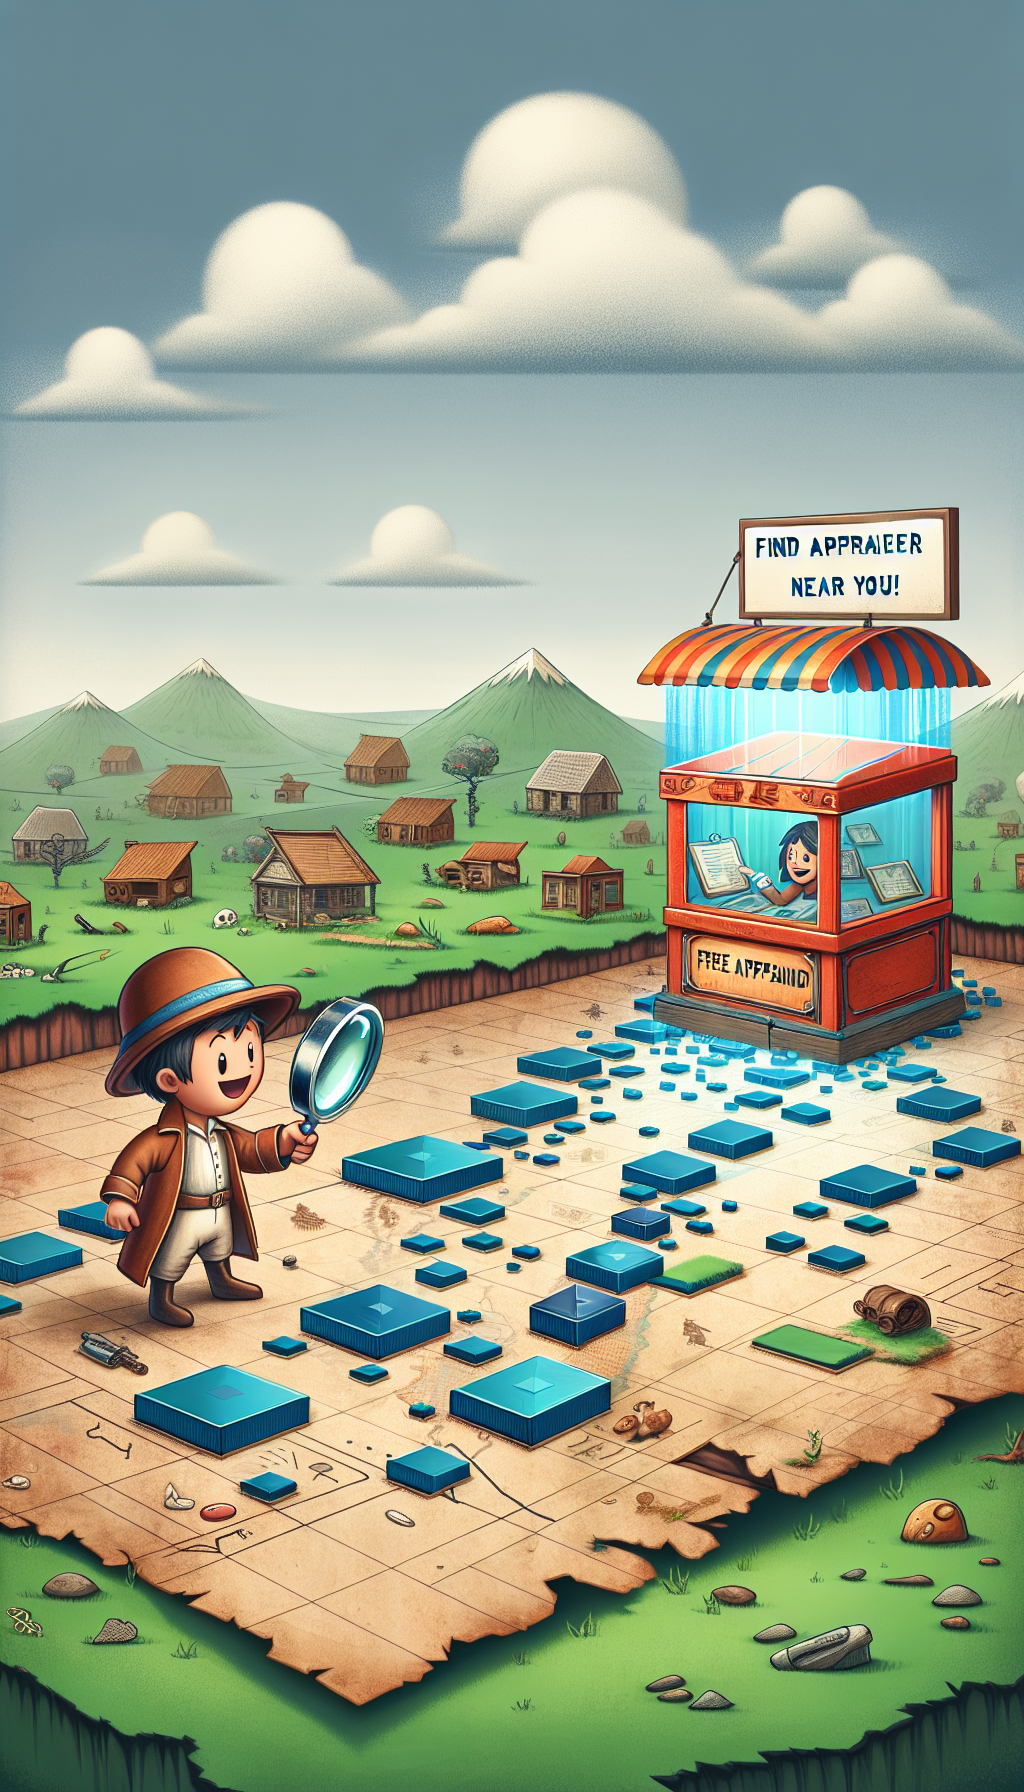 An eager character, magnifying glass in hand, stands amidst a whimsical treasure map that morphs into a digital interface on one end. Icons of antique items trail towards a glowing, oversized "Free Appraisal" booth manned by a friendly appraiser, with a speech bubble "Find Appraisers Near You!" adding a modern twist to the quest for value.